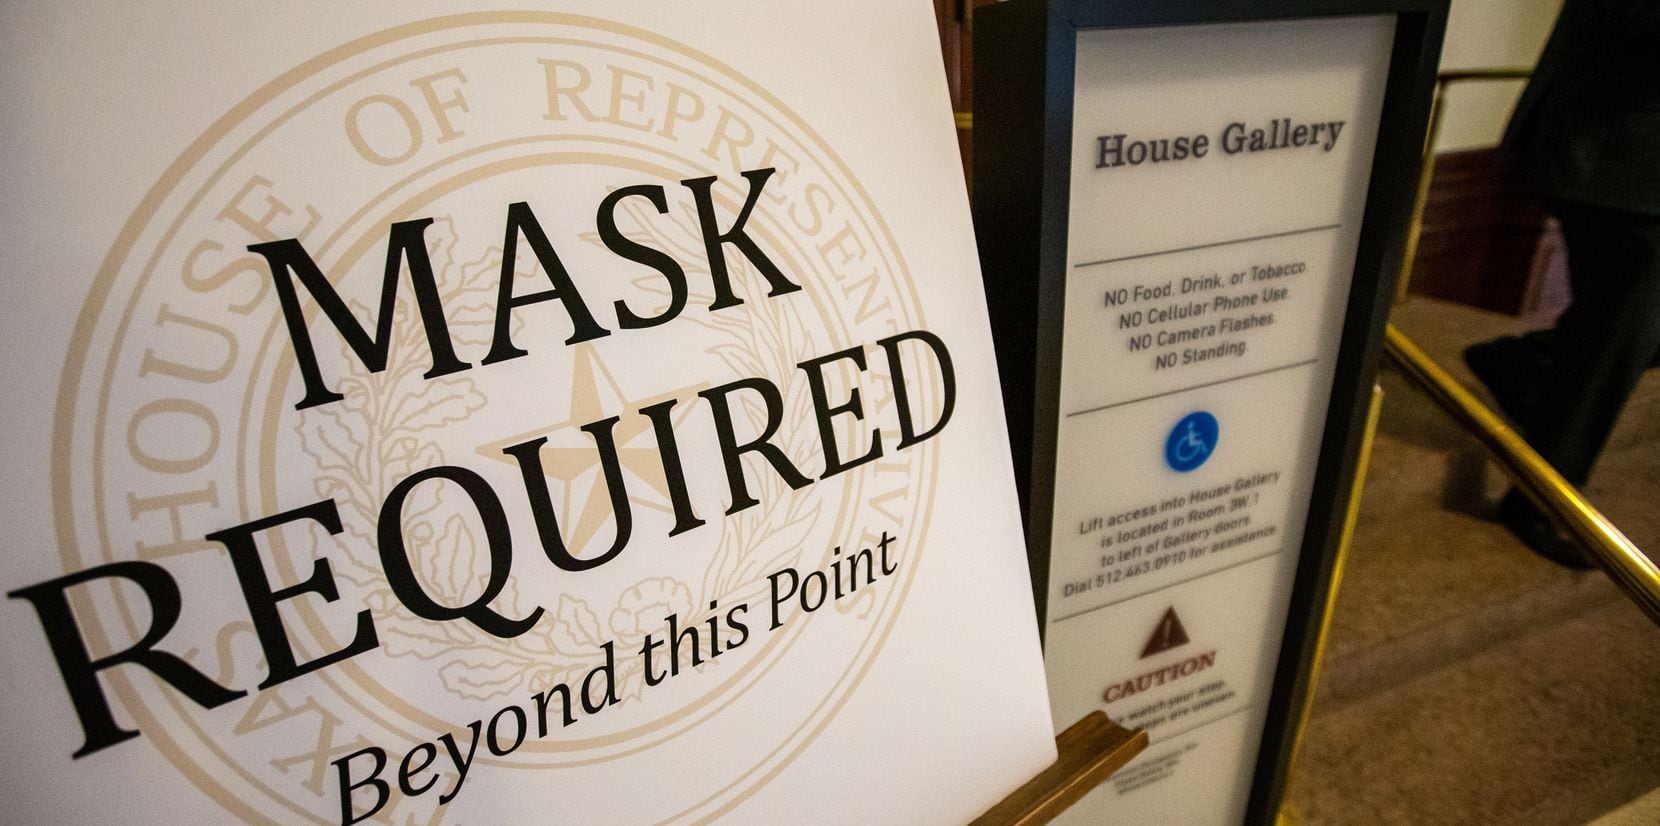 Presumptive new House Speaker Dade Phelan says visitors in the public spaces at the Texas Capitol this session will have to wear masks. In their private offices, senators and state representatives will set their own COVID-19 safety policies.